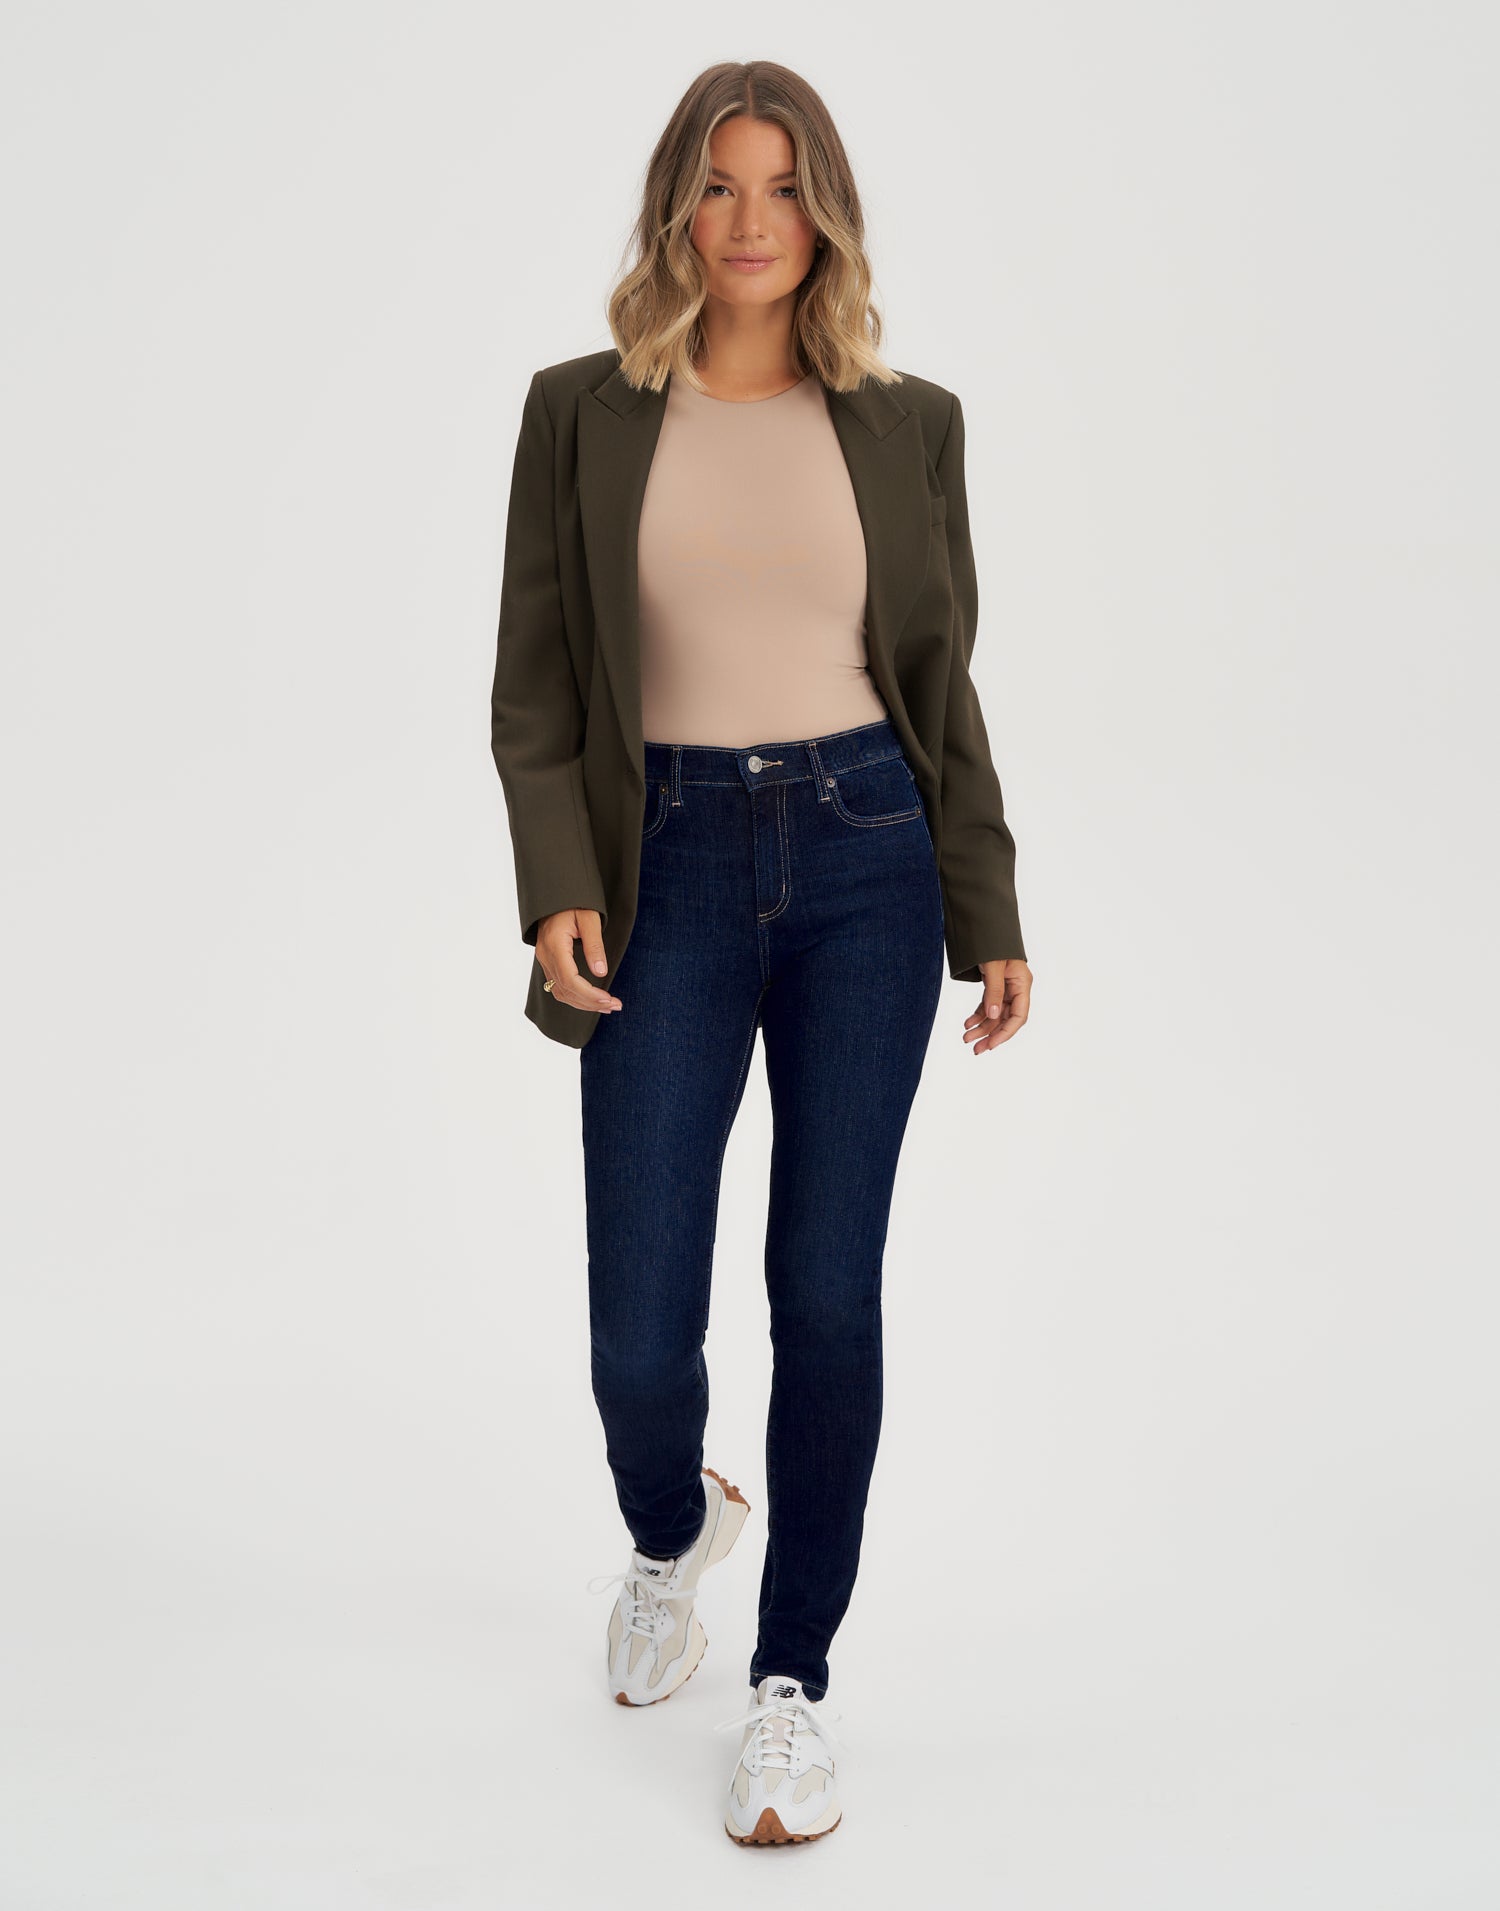 SPANX - Straight Leg Jeans that will be your jean come true: made